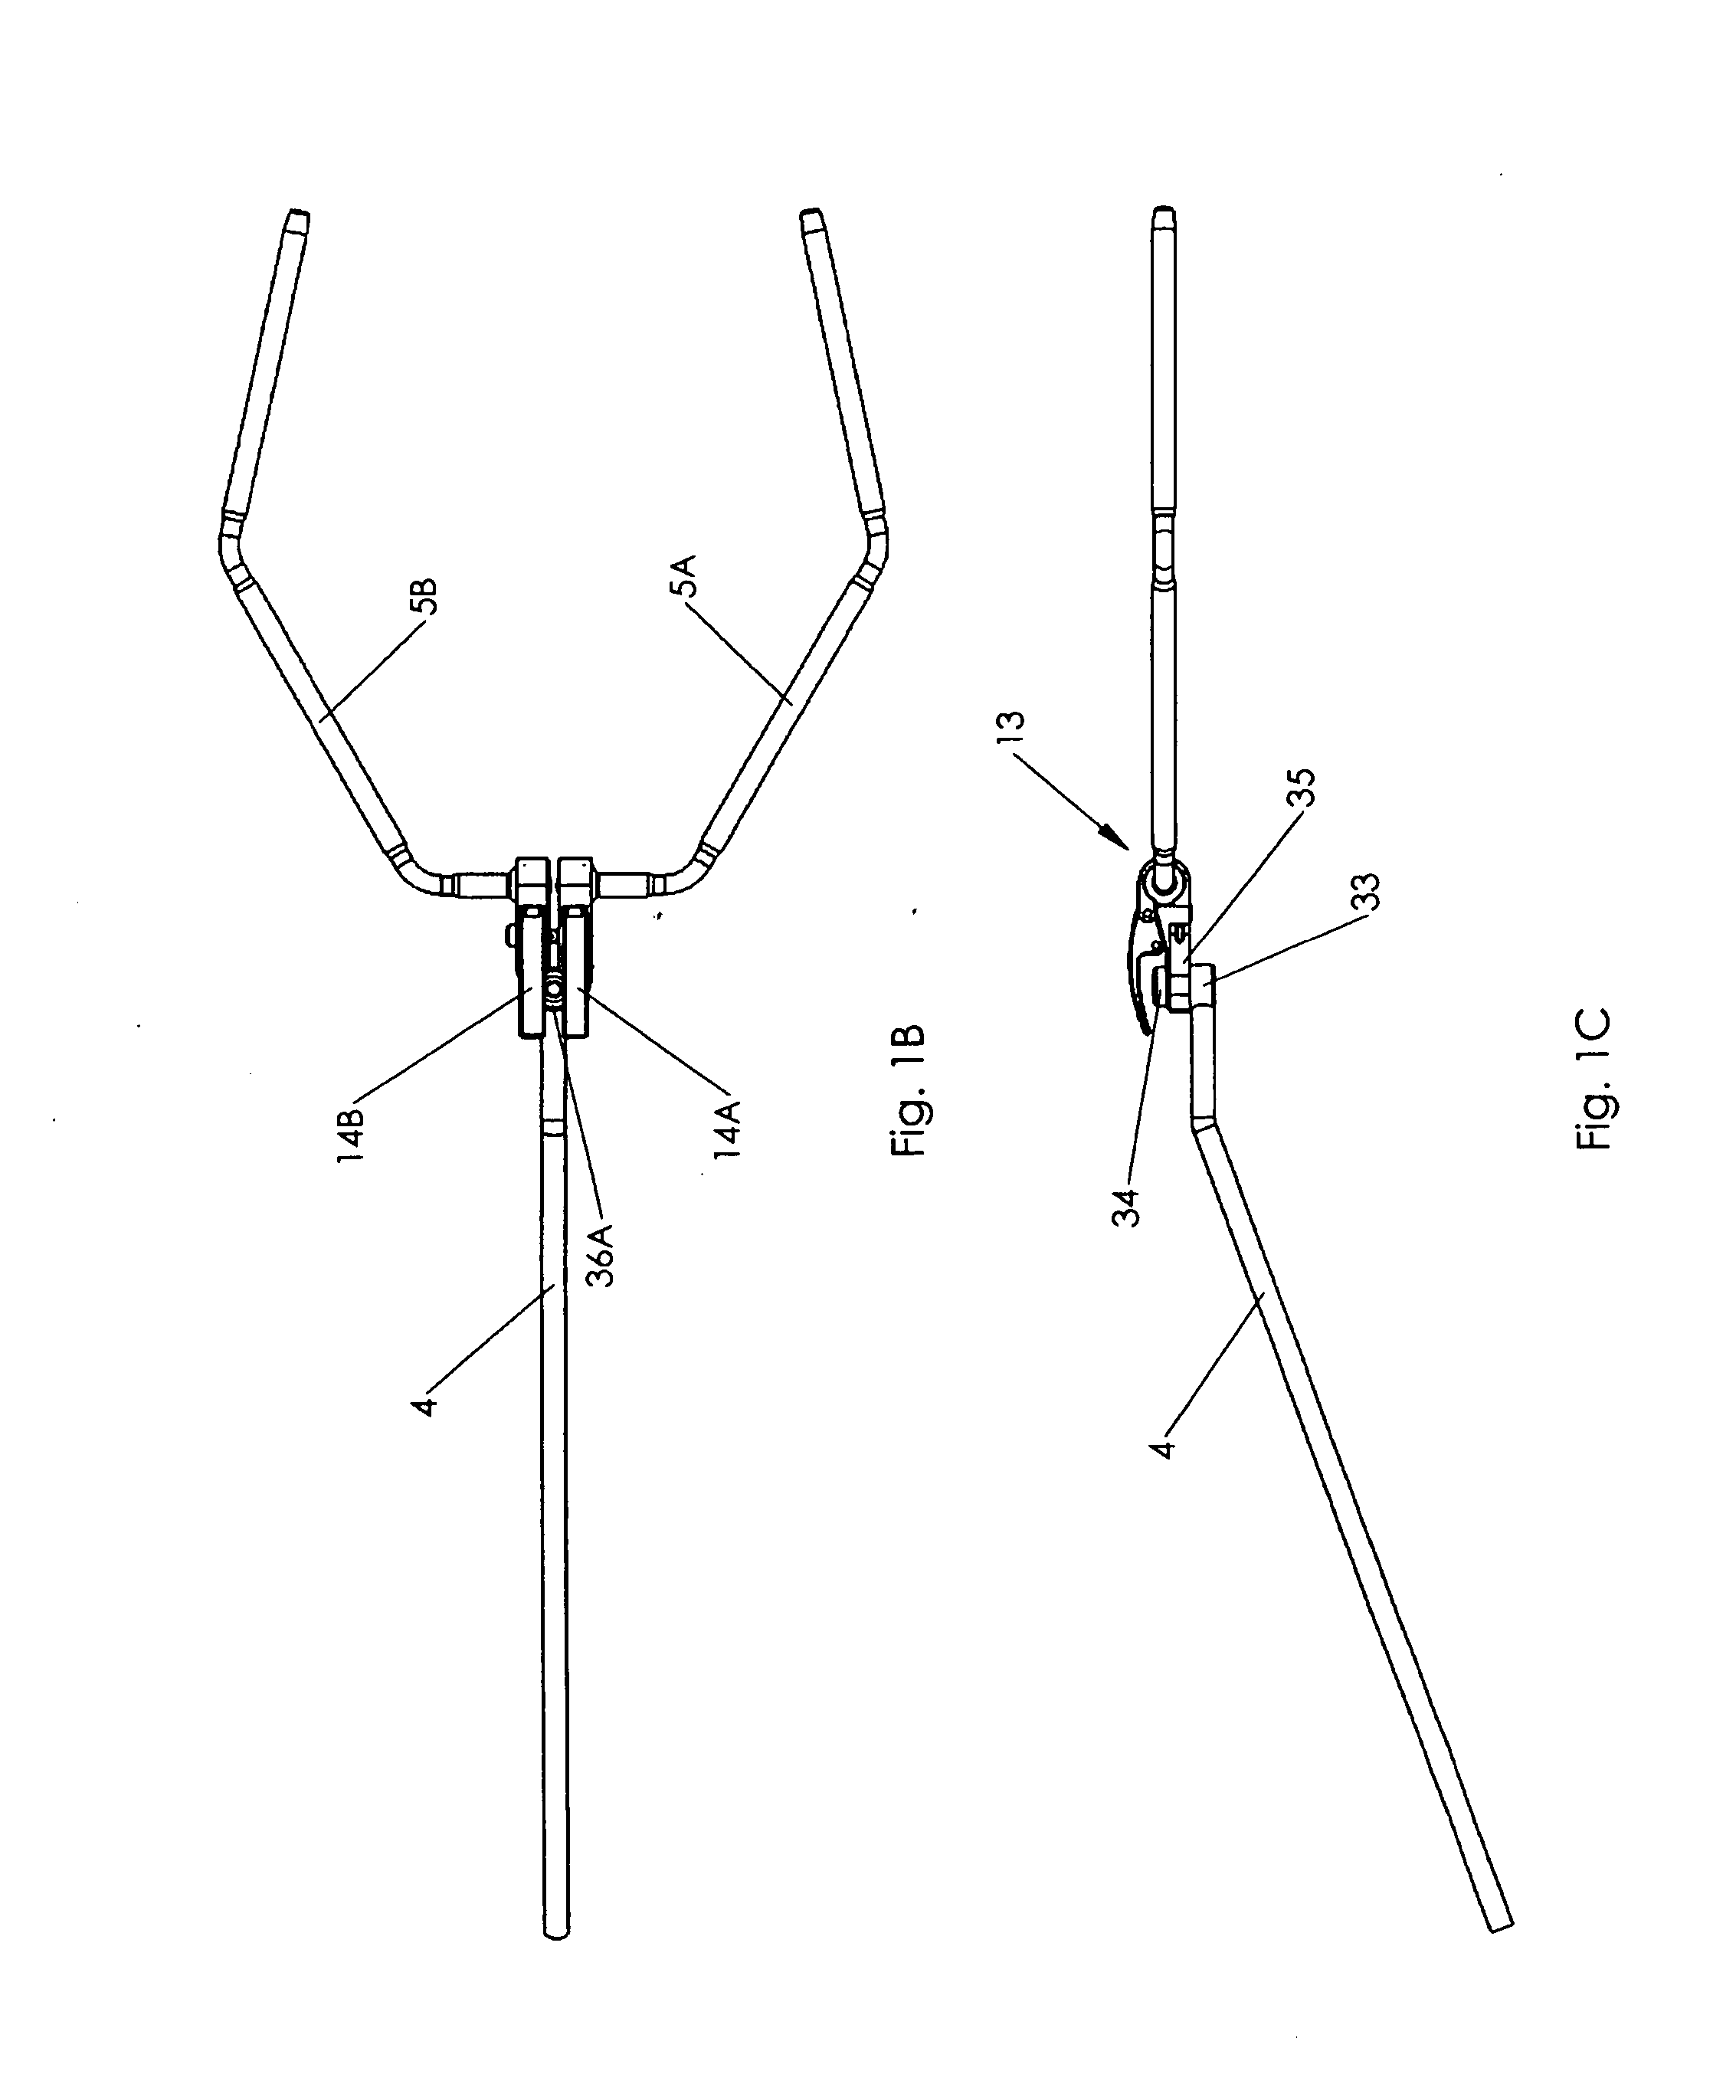 Surgical retractor frame system